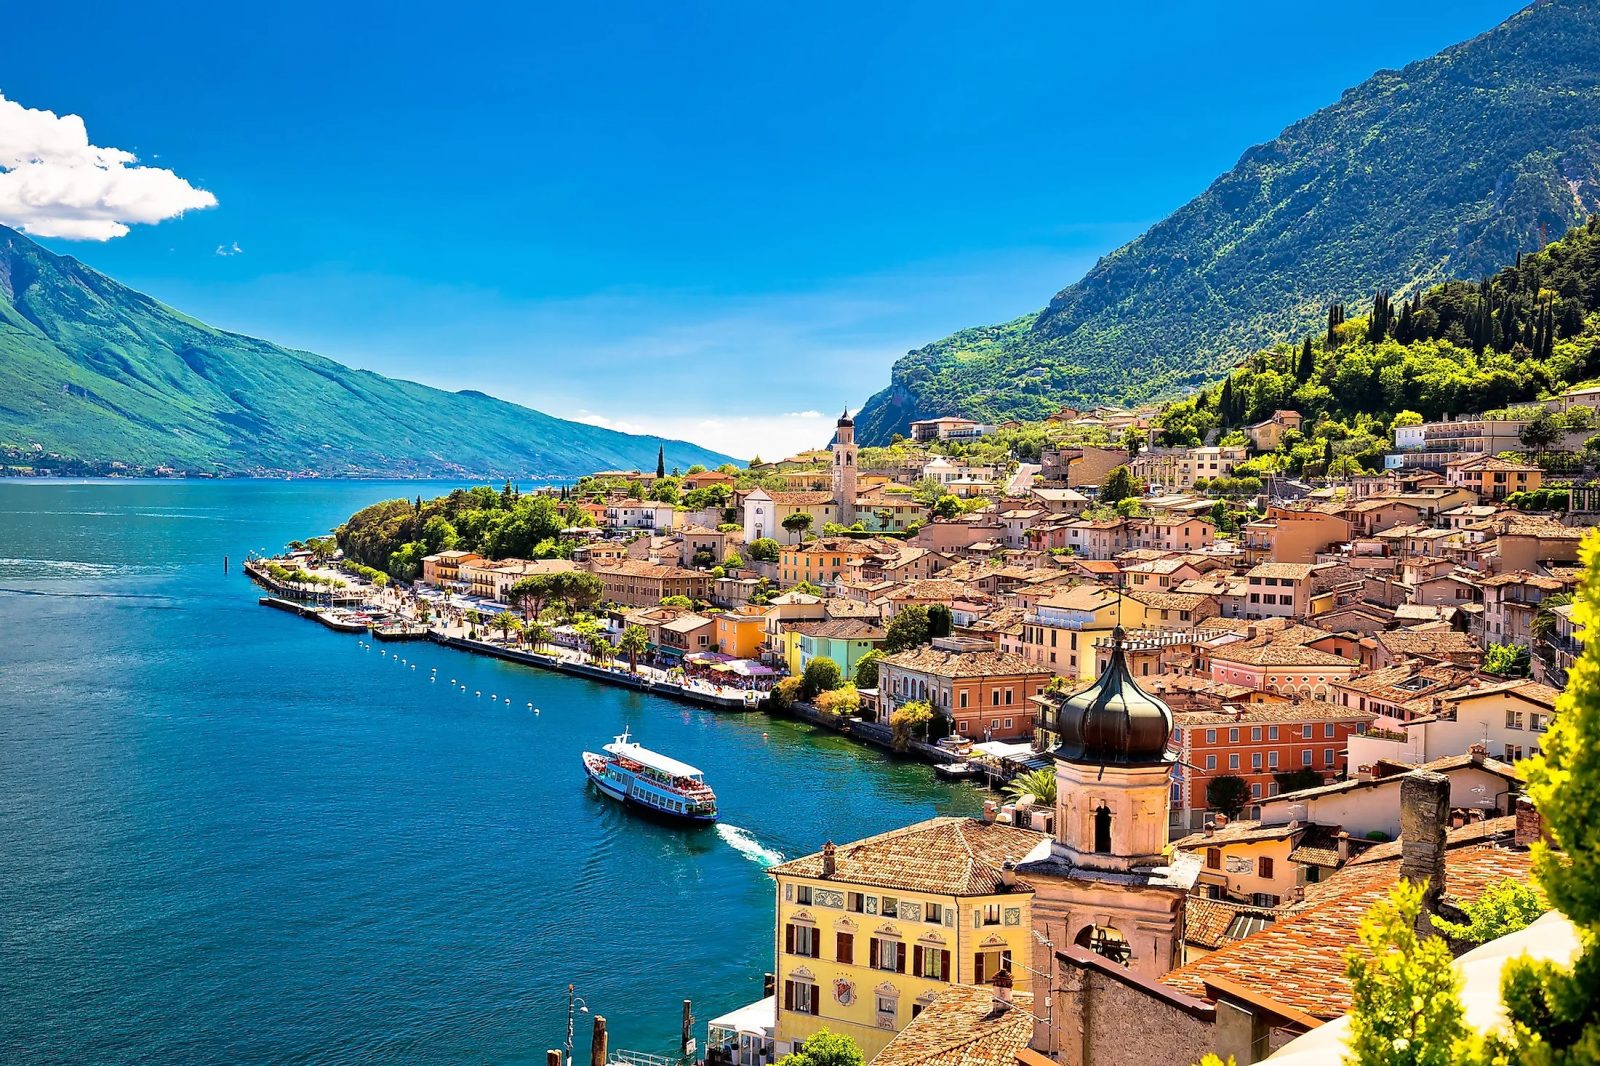 Do You Have Smarts to Pass This World Geography Quiz With Flying Colors ? Lake Garda, Italy